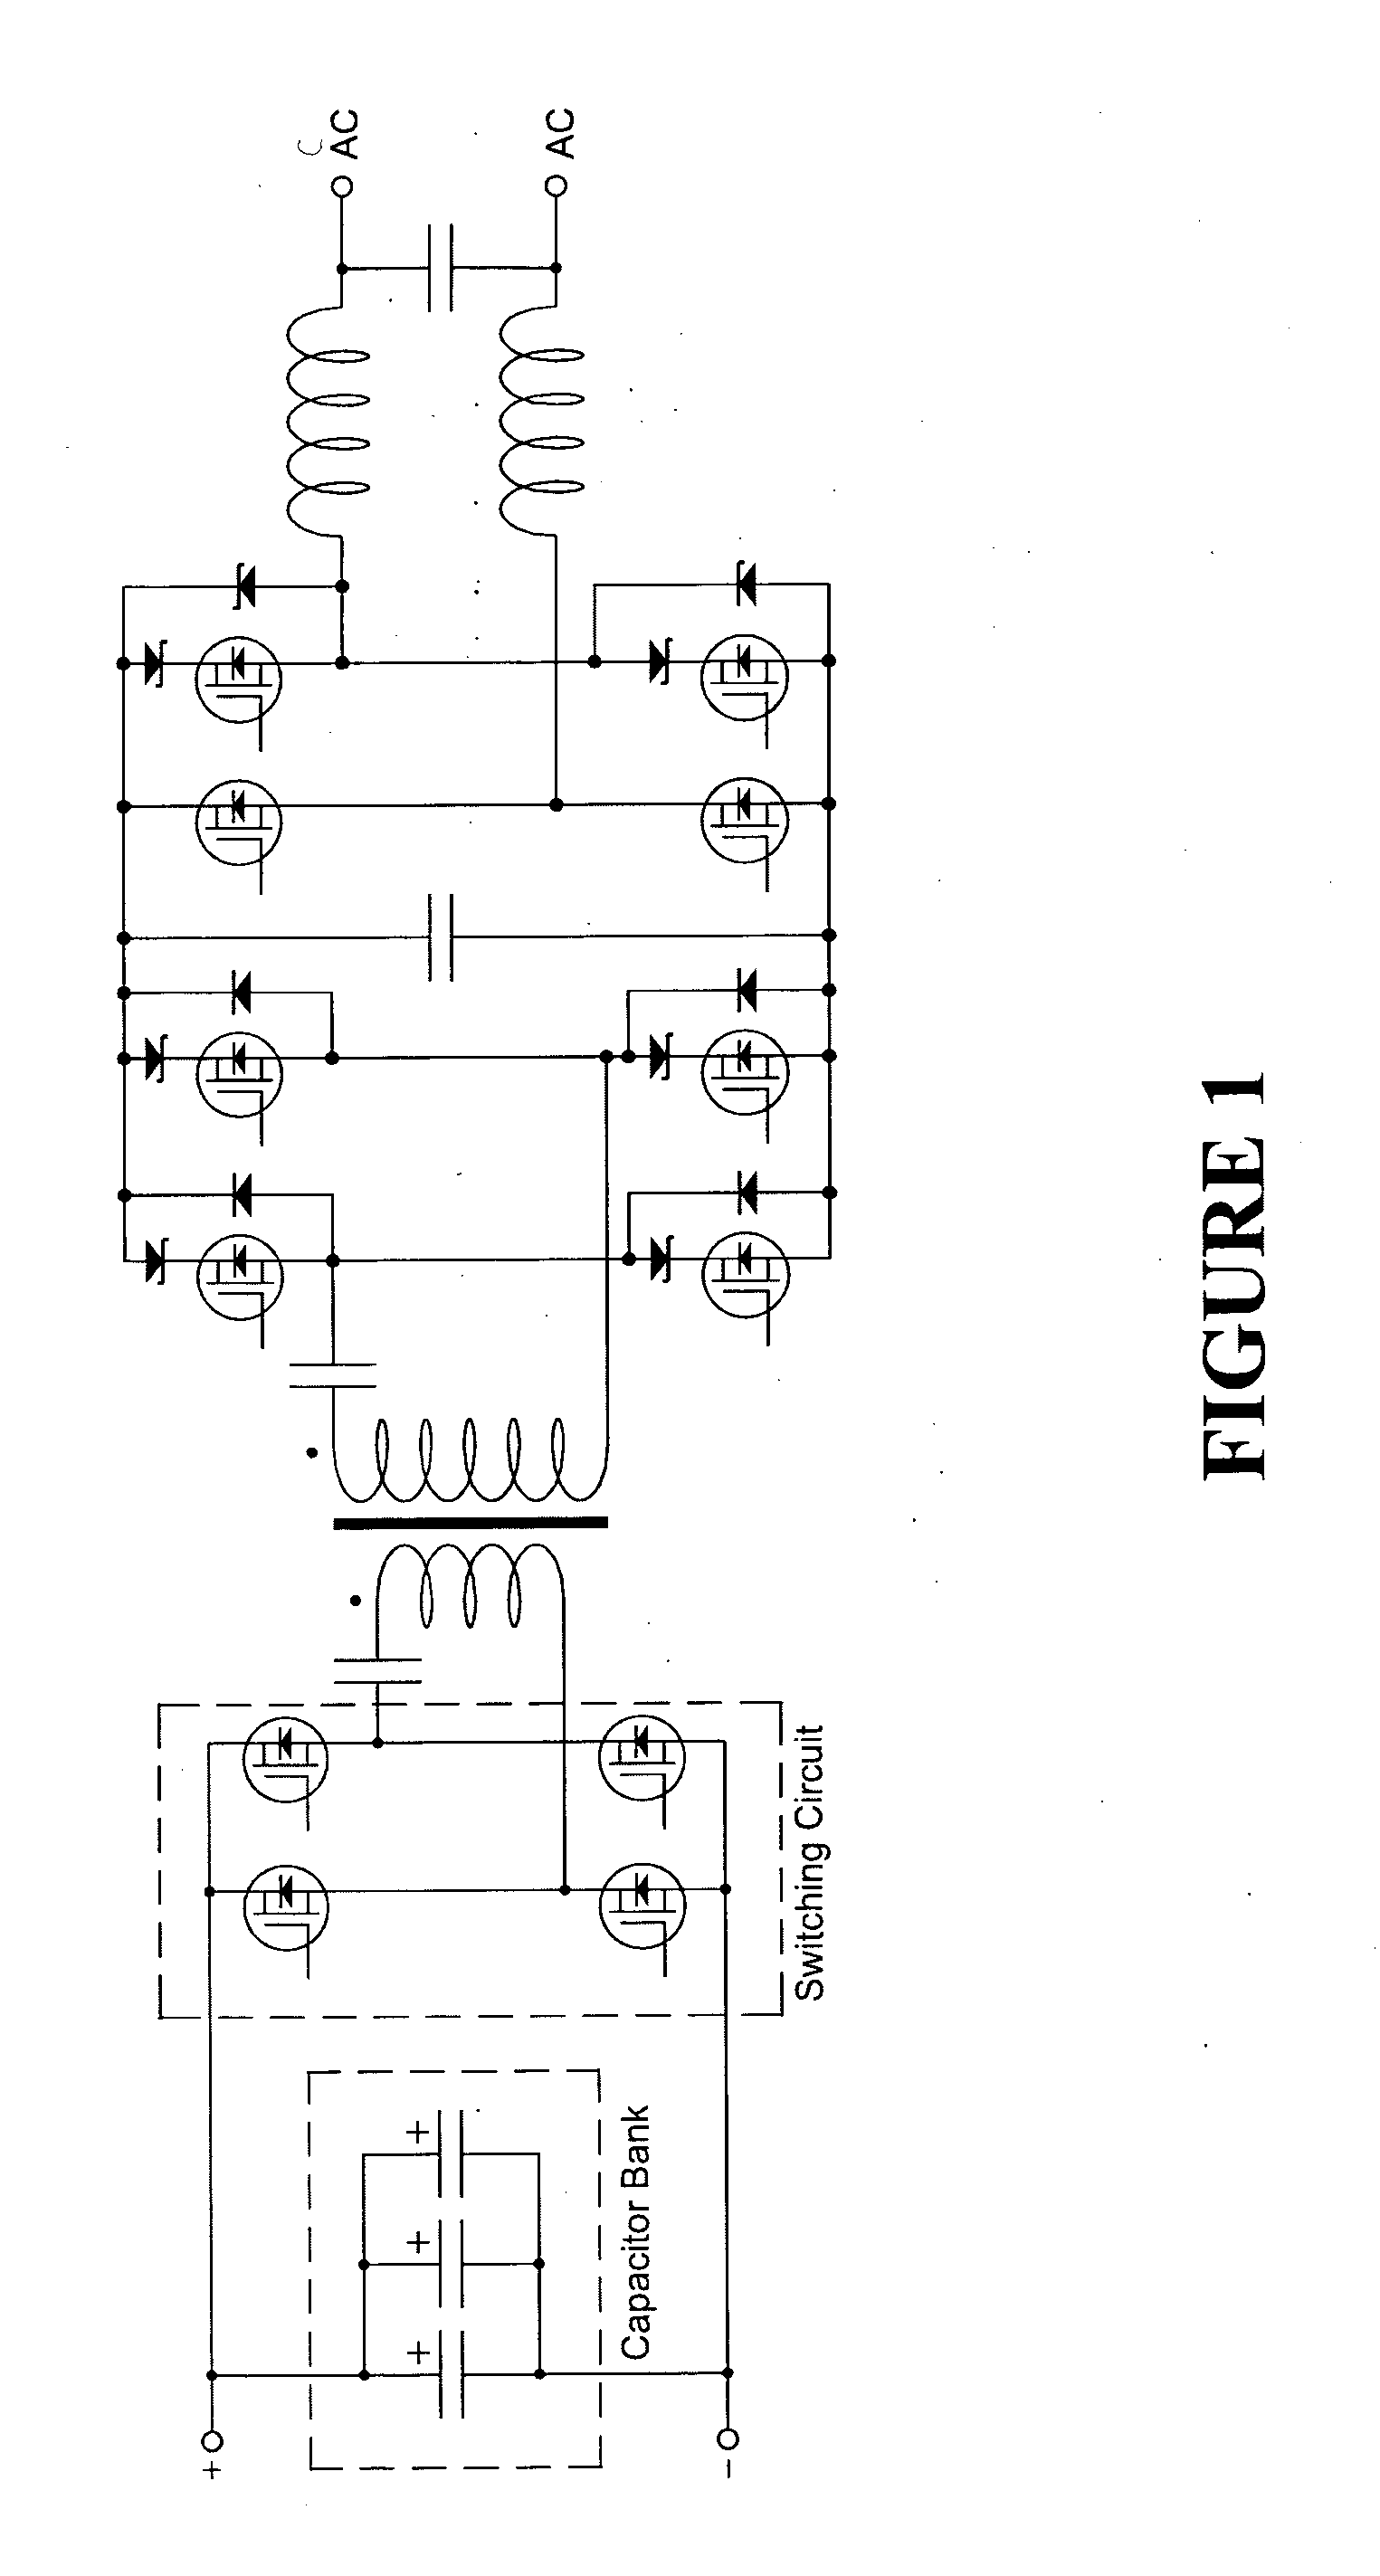 Layered Structure Connection and Assembly